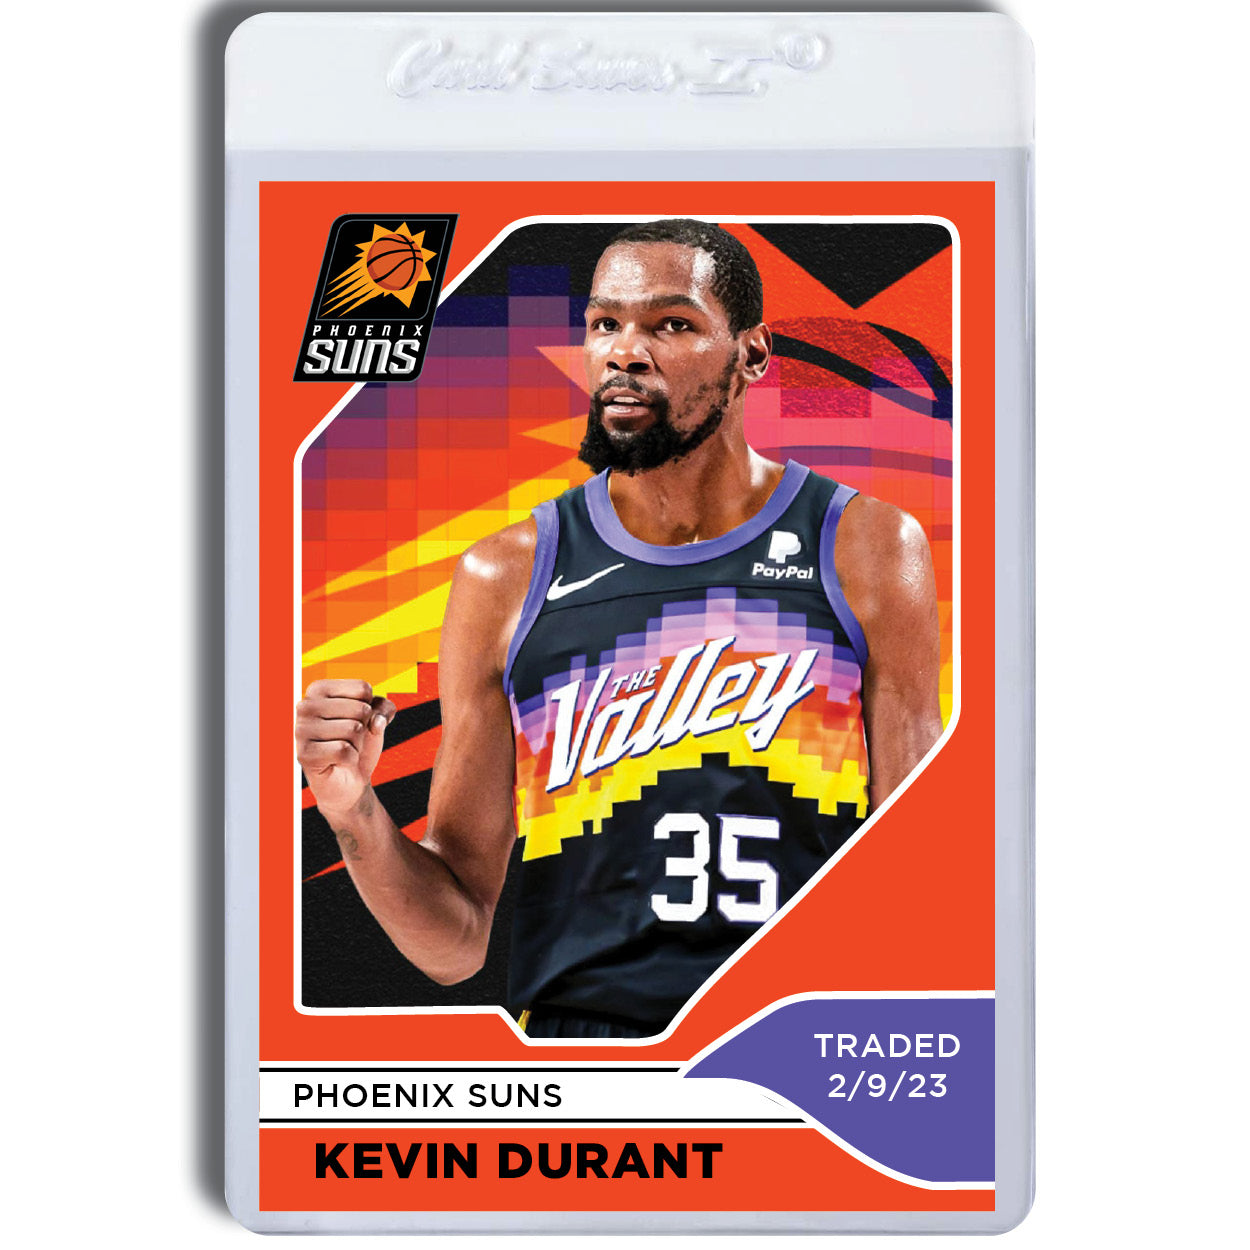 kevin durant jersey the valley